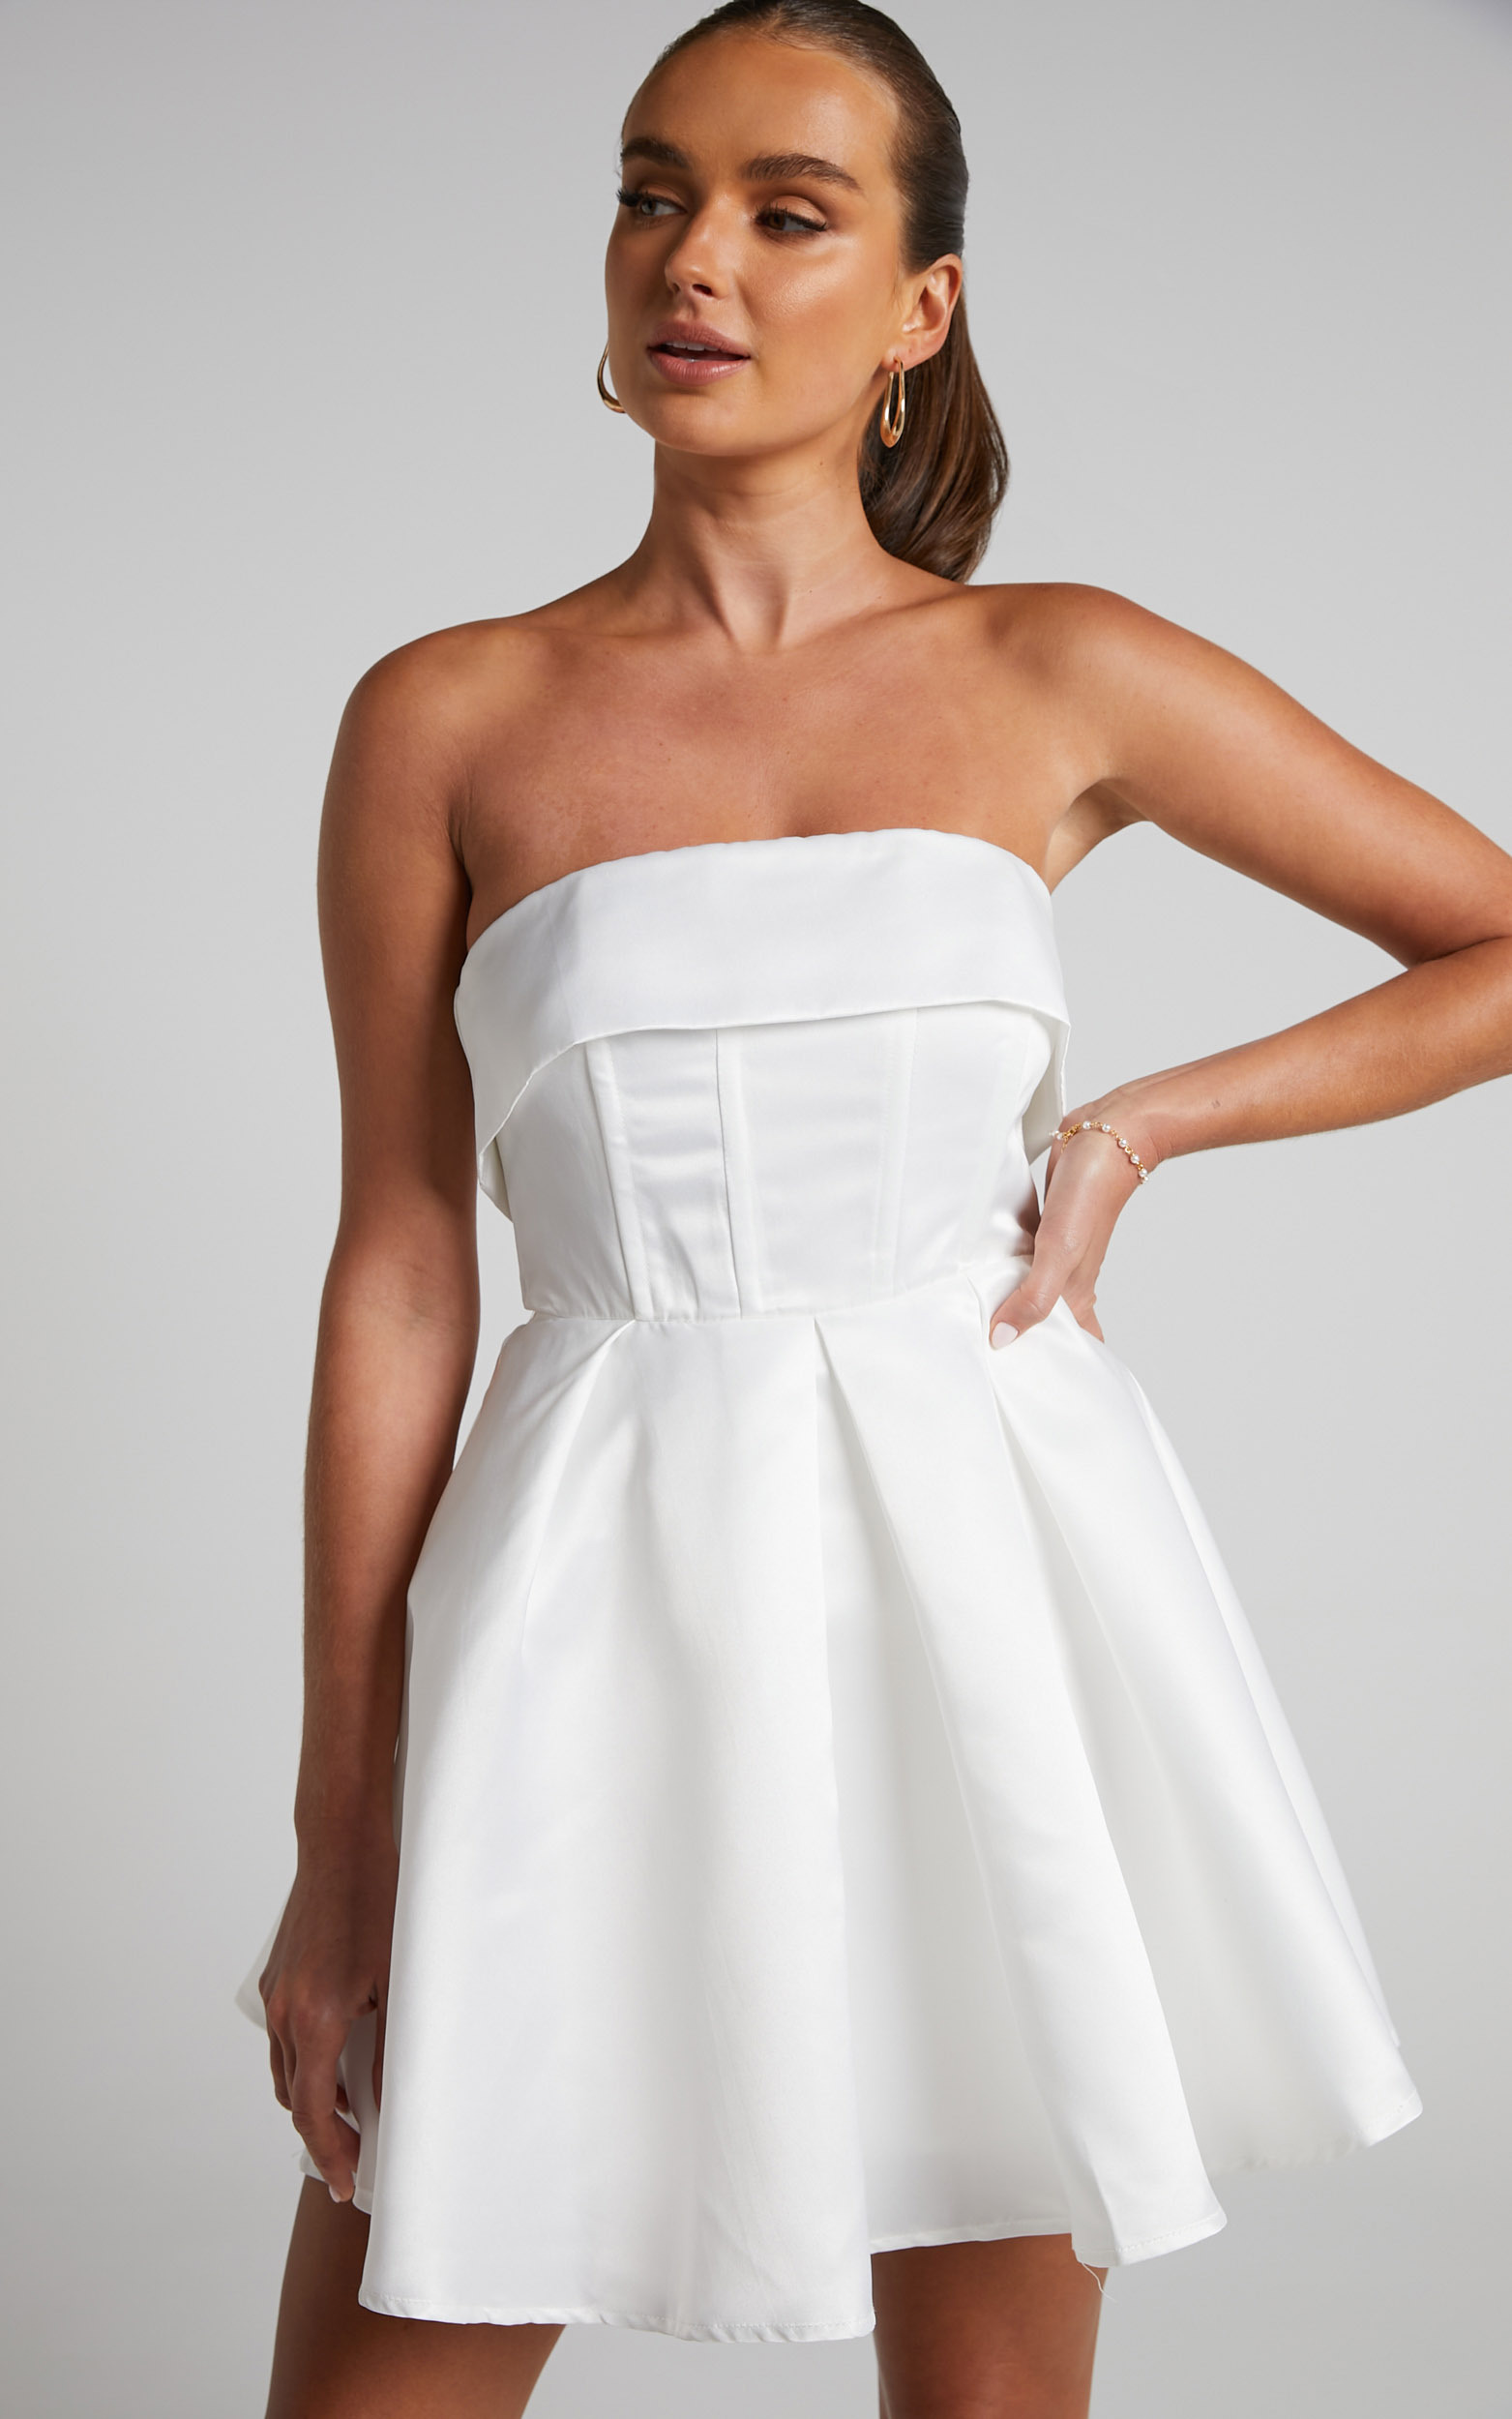 Valora Mini Dress - Strapless Fit and Flare Satin Dress in Ivory - 04, WHT1, hi-res image number null